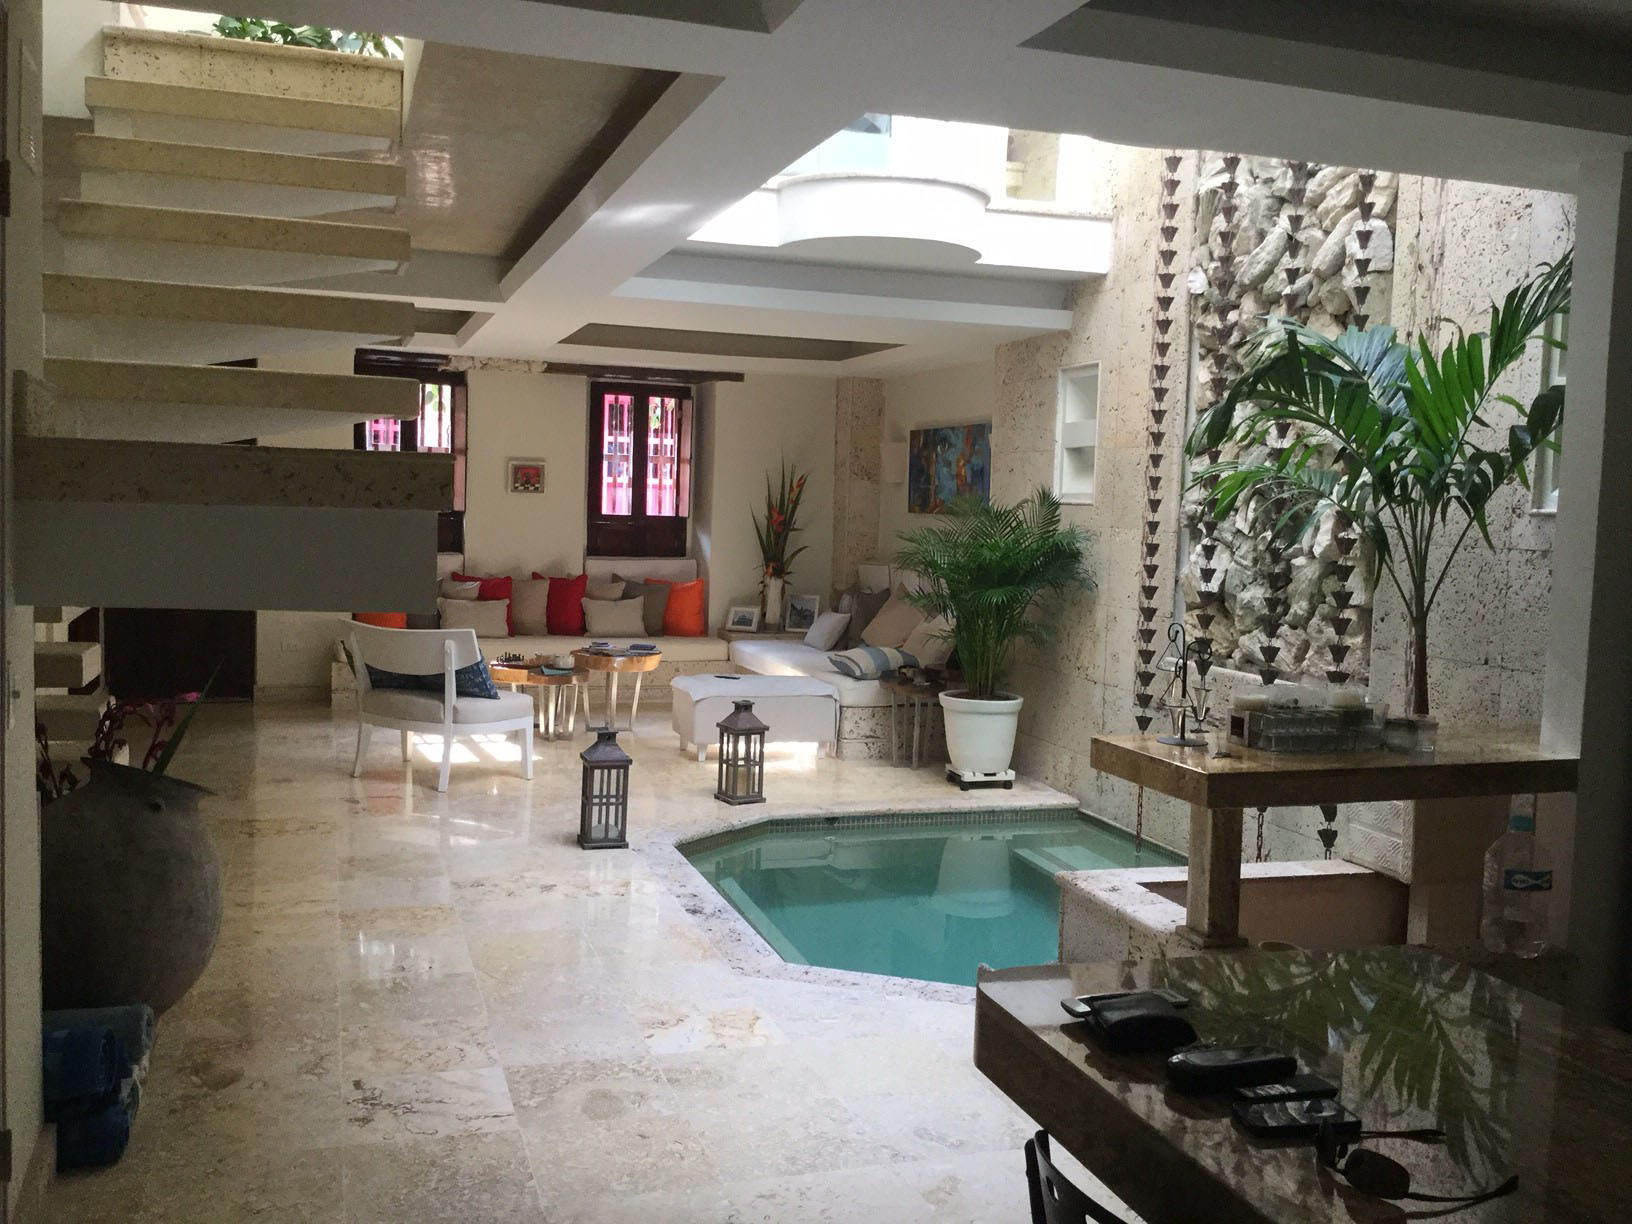 CARTAGENA HISTORIC  WALLED OLD CITY  3 BEDROOM HOUSE